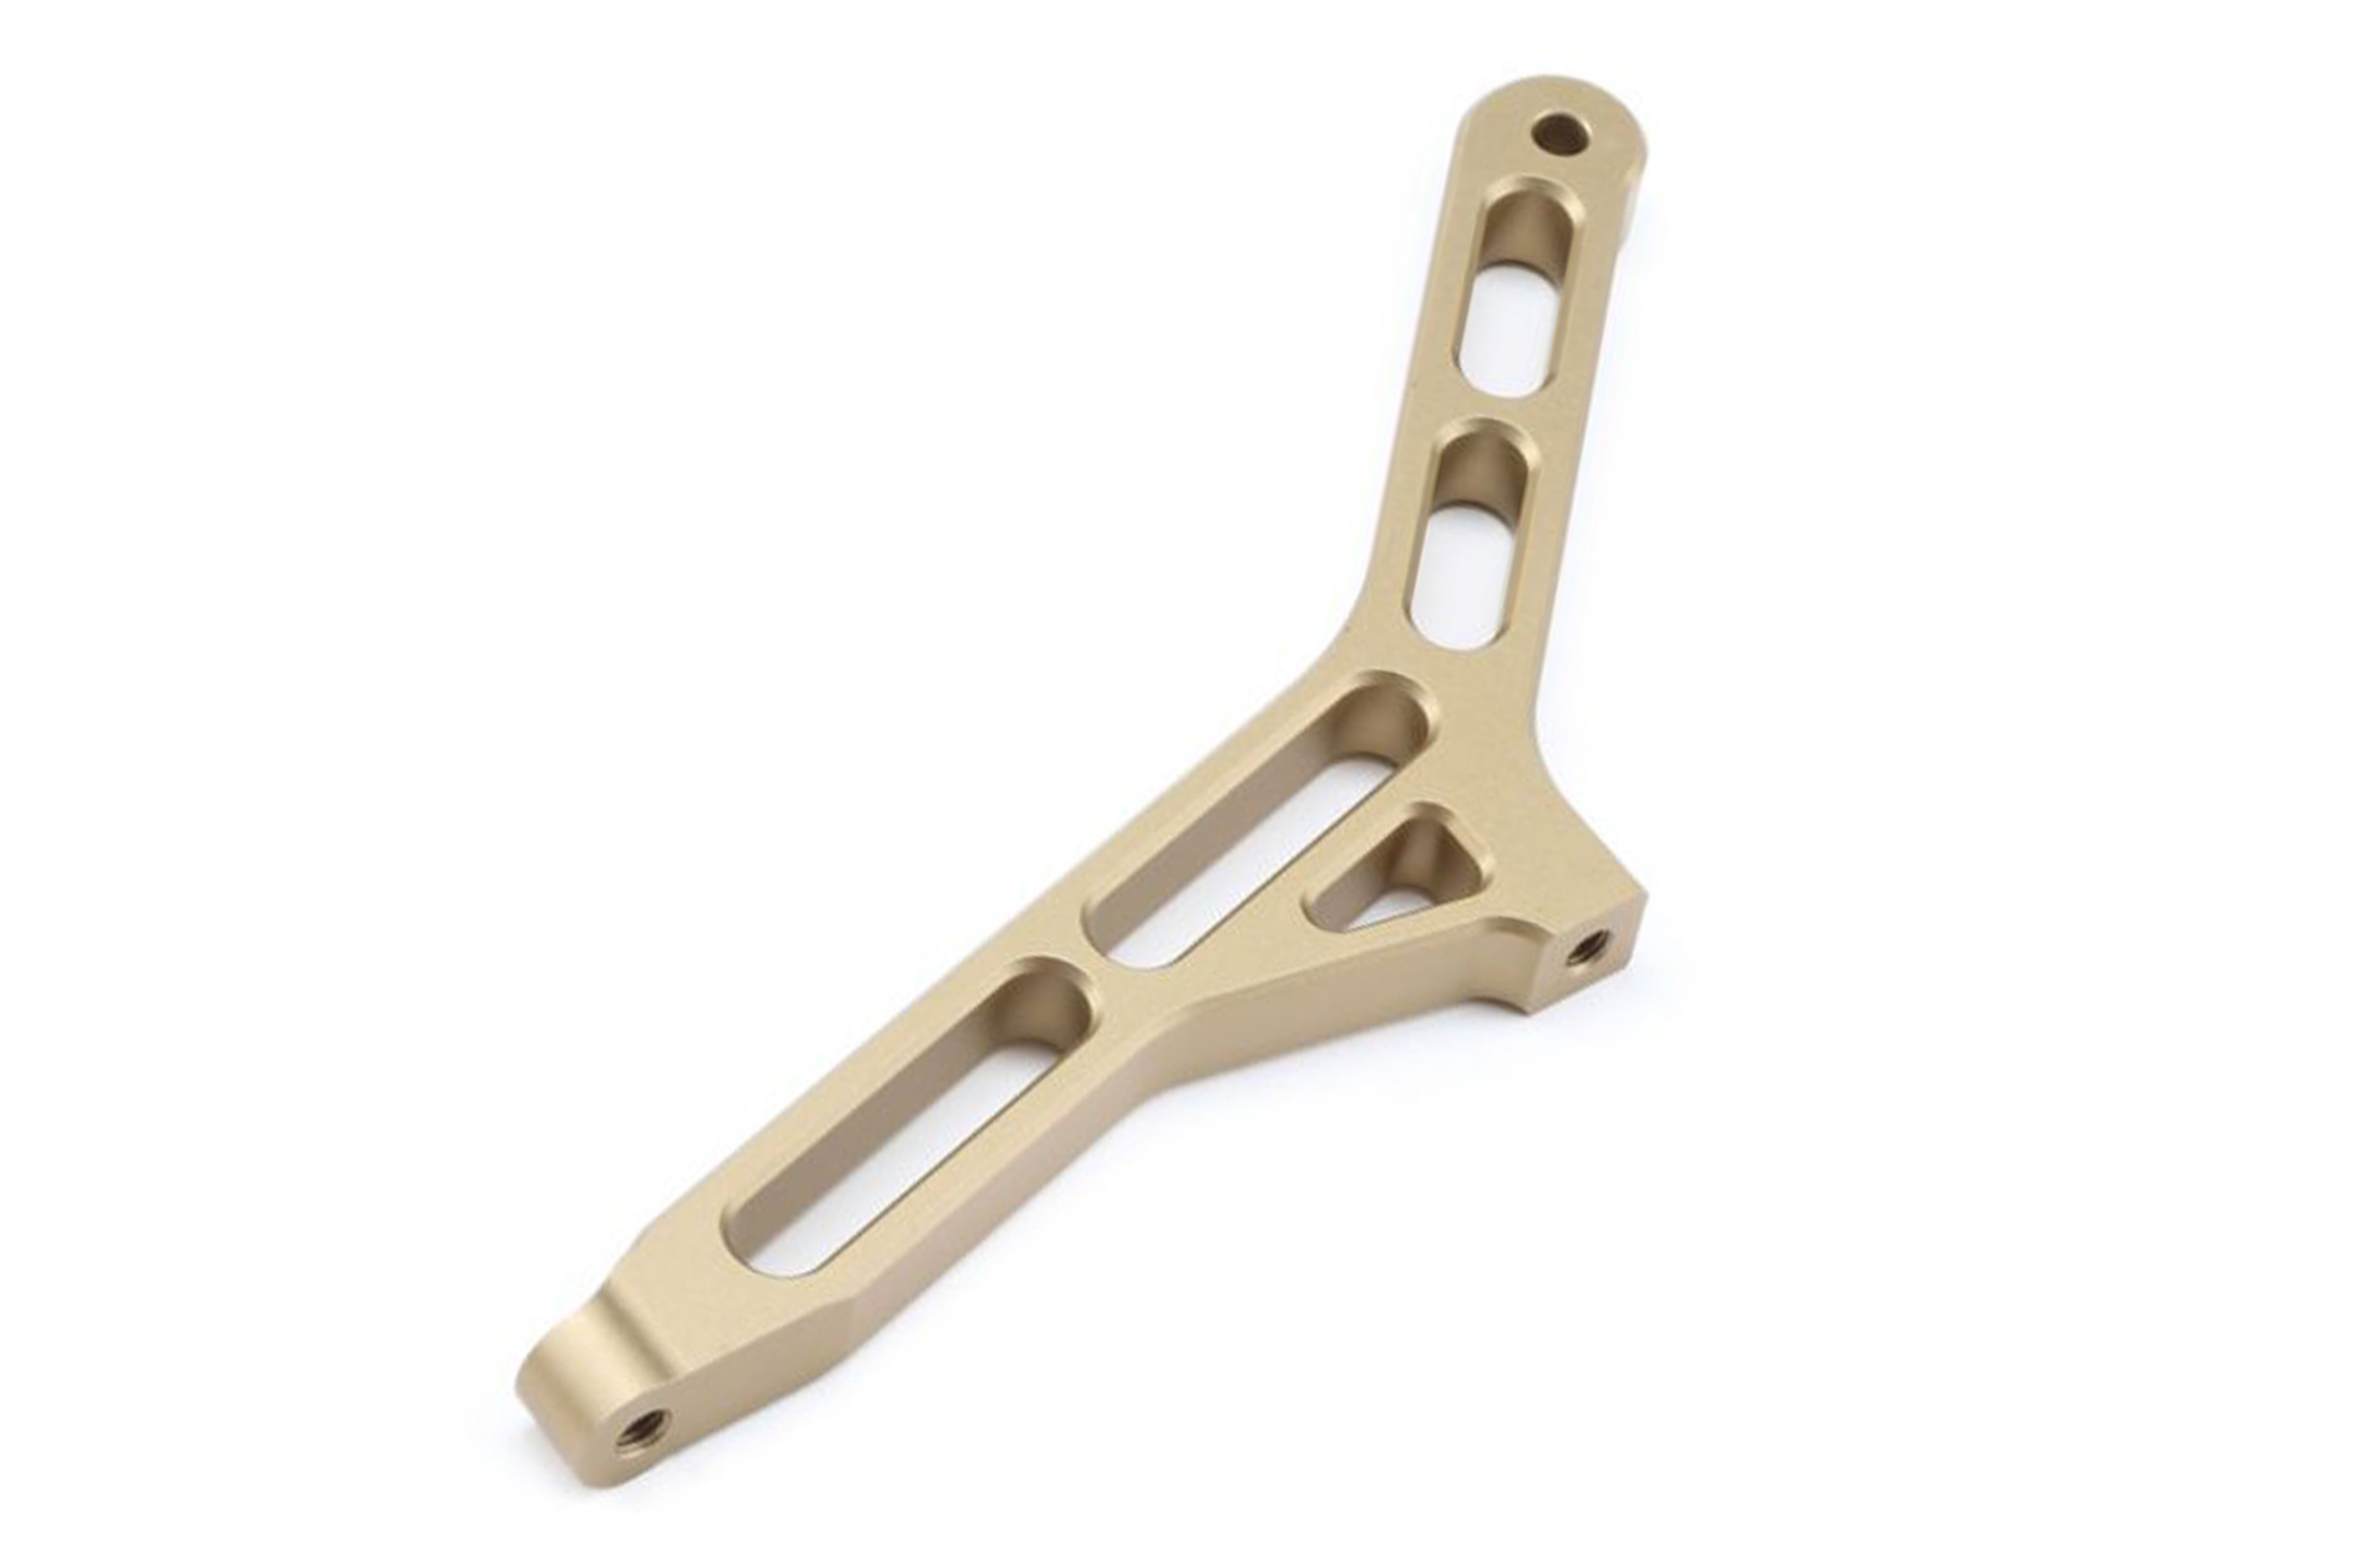 TLR351004 TLR Aluminum Rear Chassis Brace, HA for 5ive-T/2.0 and Mini WRC